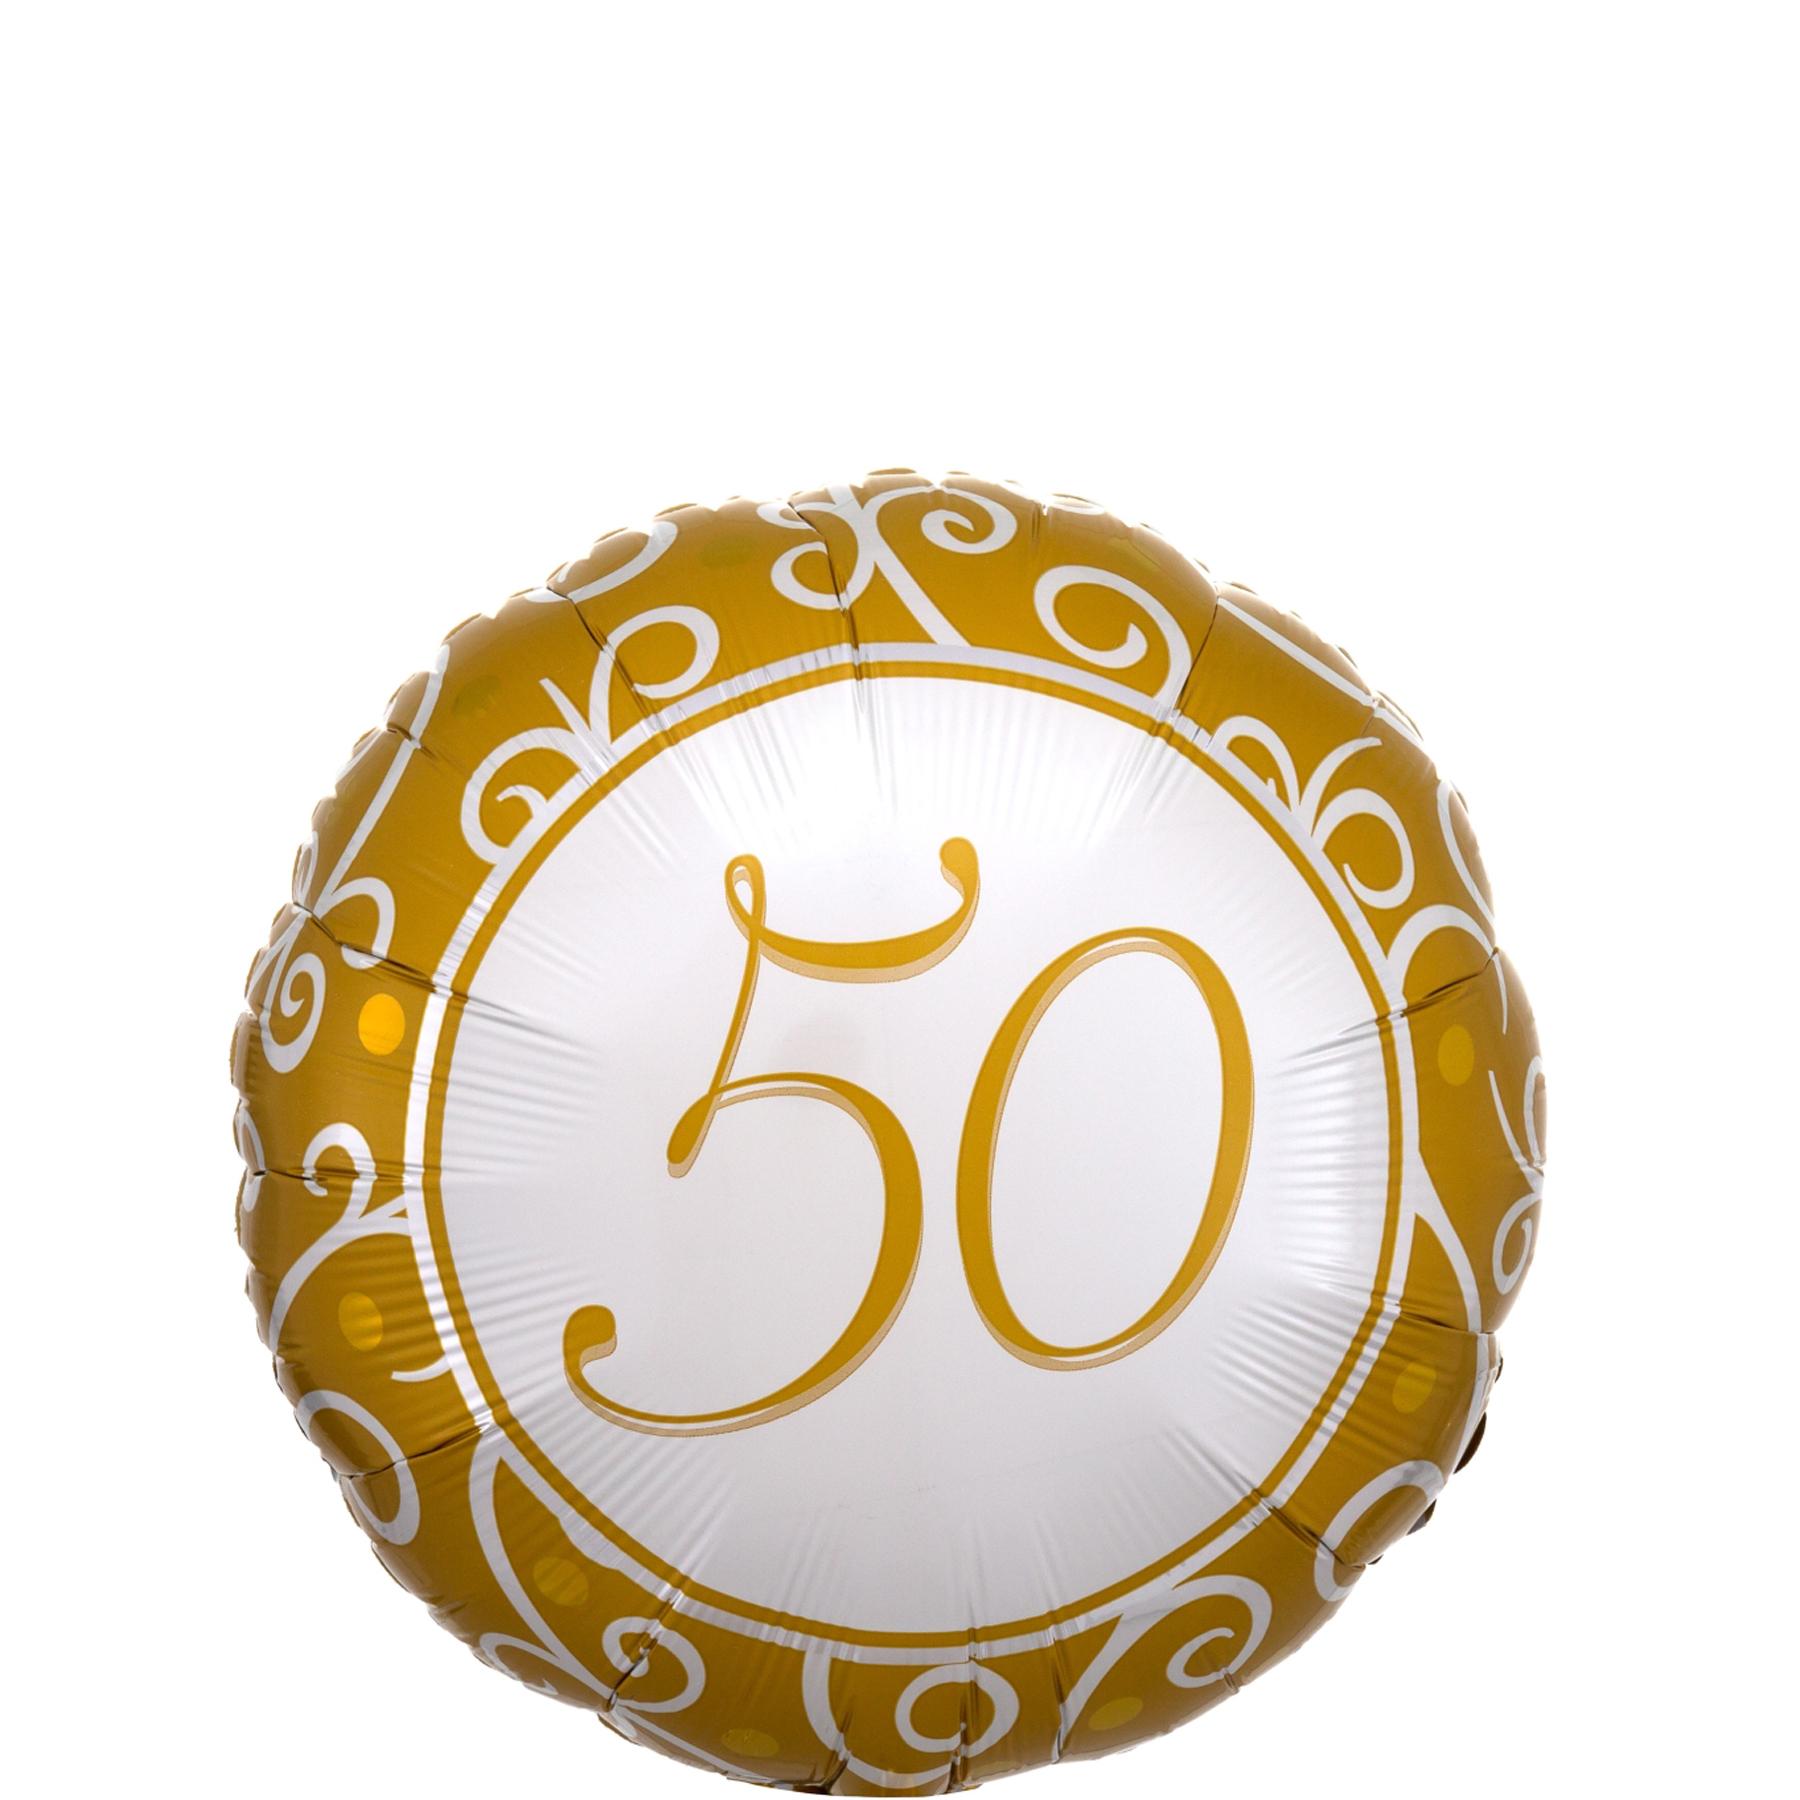 50th Anniversary Round Balloon 45cm Balloons & Streamers - Party Centre